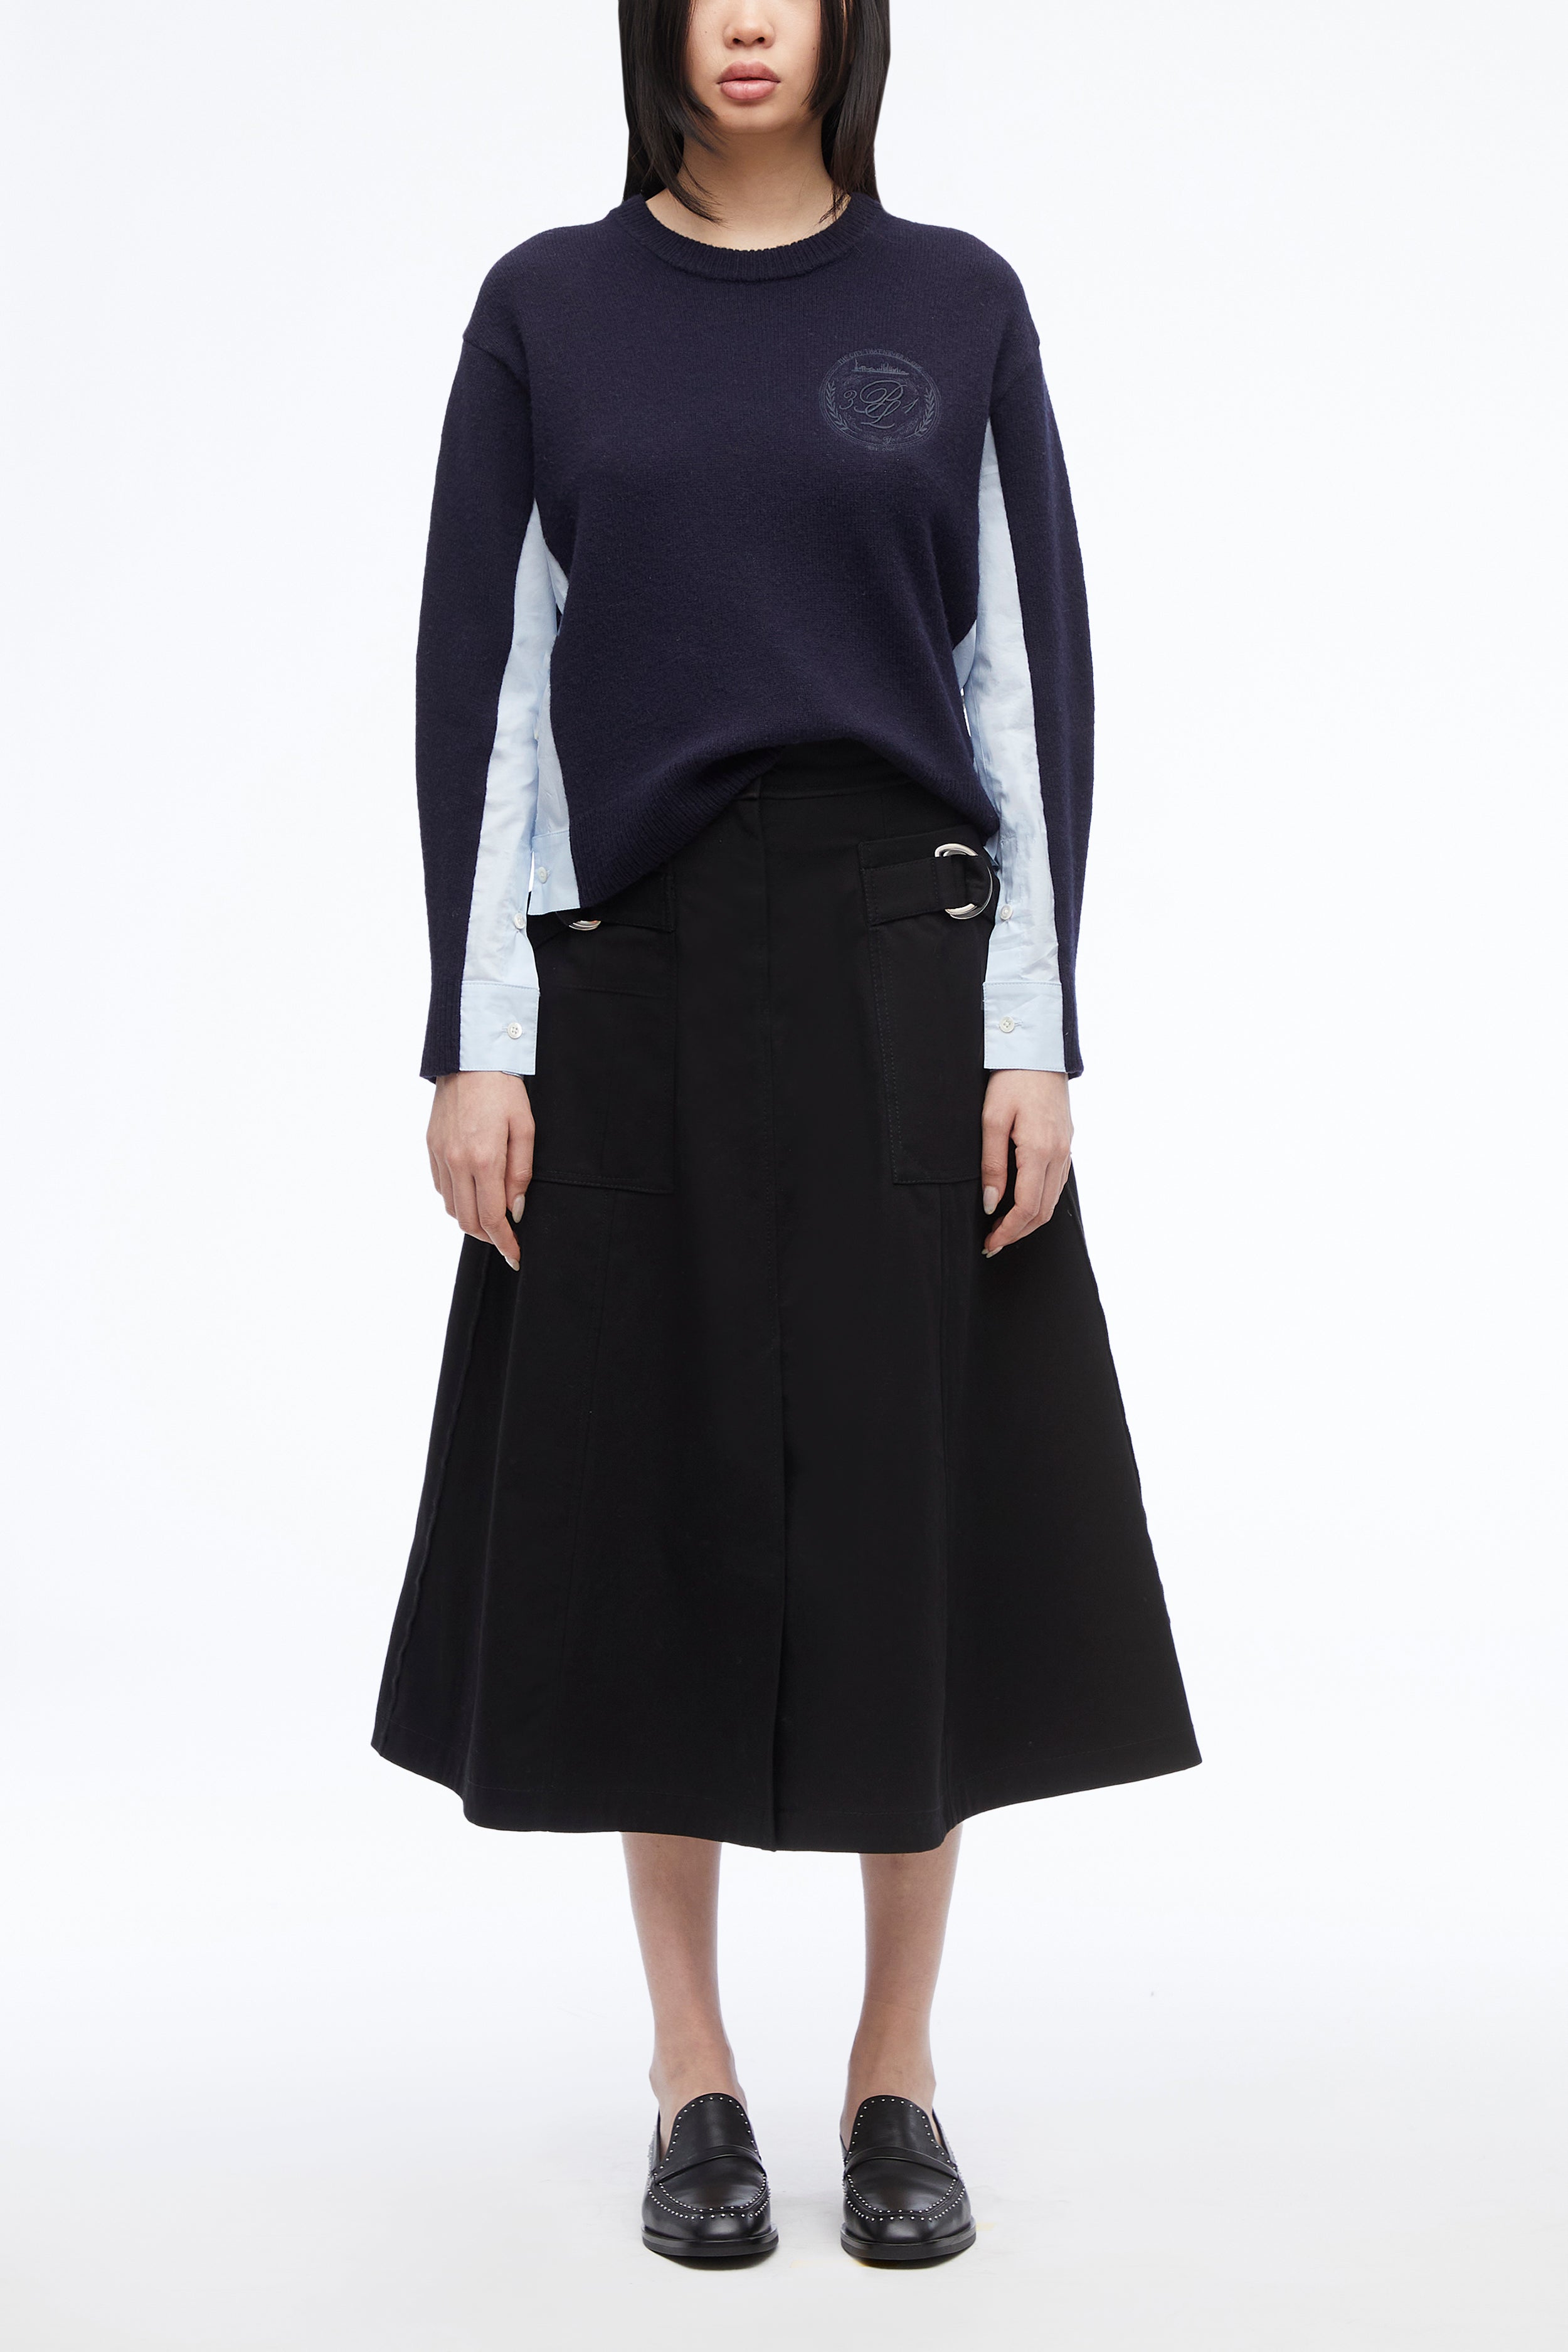 The Thirty One Sweater – 3.1 Phillip Lim